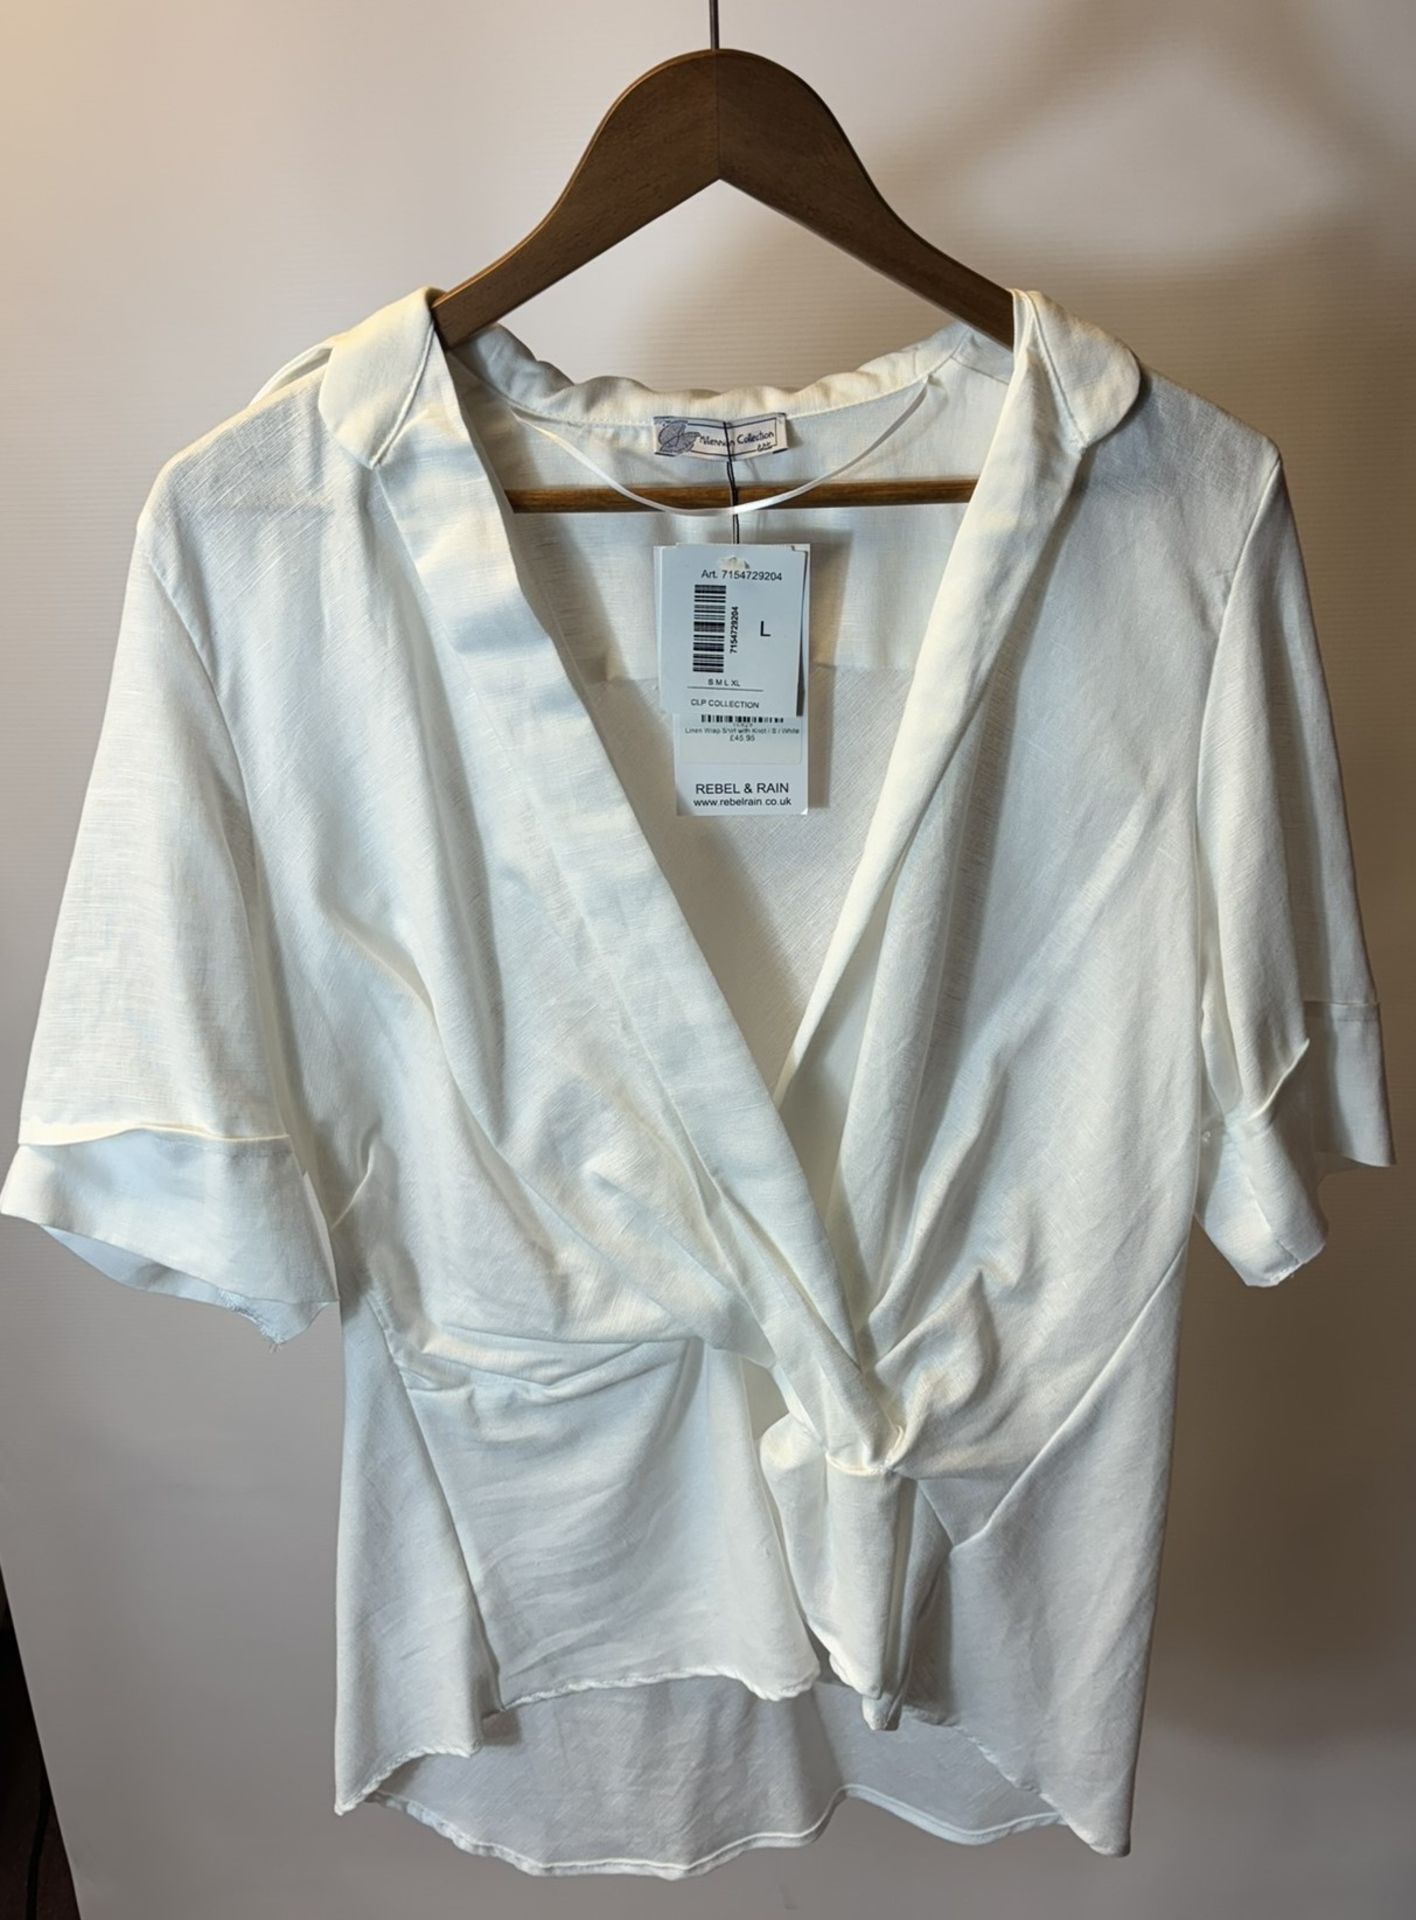 15 x Various Women's Tops/Blouses/Shirts As Seen In Photos - Image 16 of 45